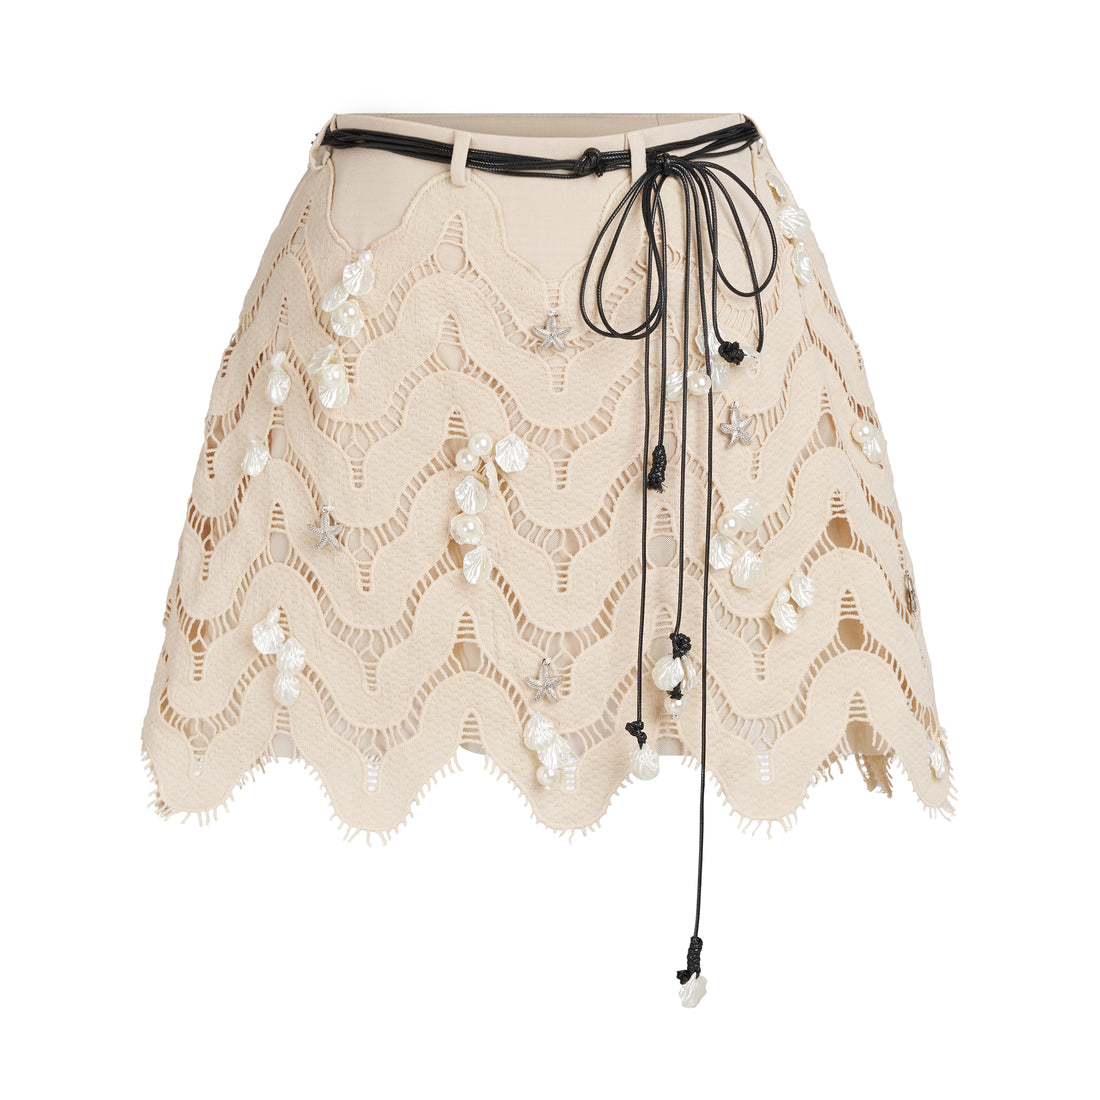 Seashell Embroidered Lace A Line Mini Skirt